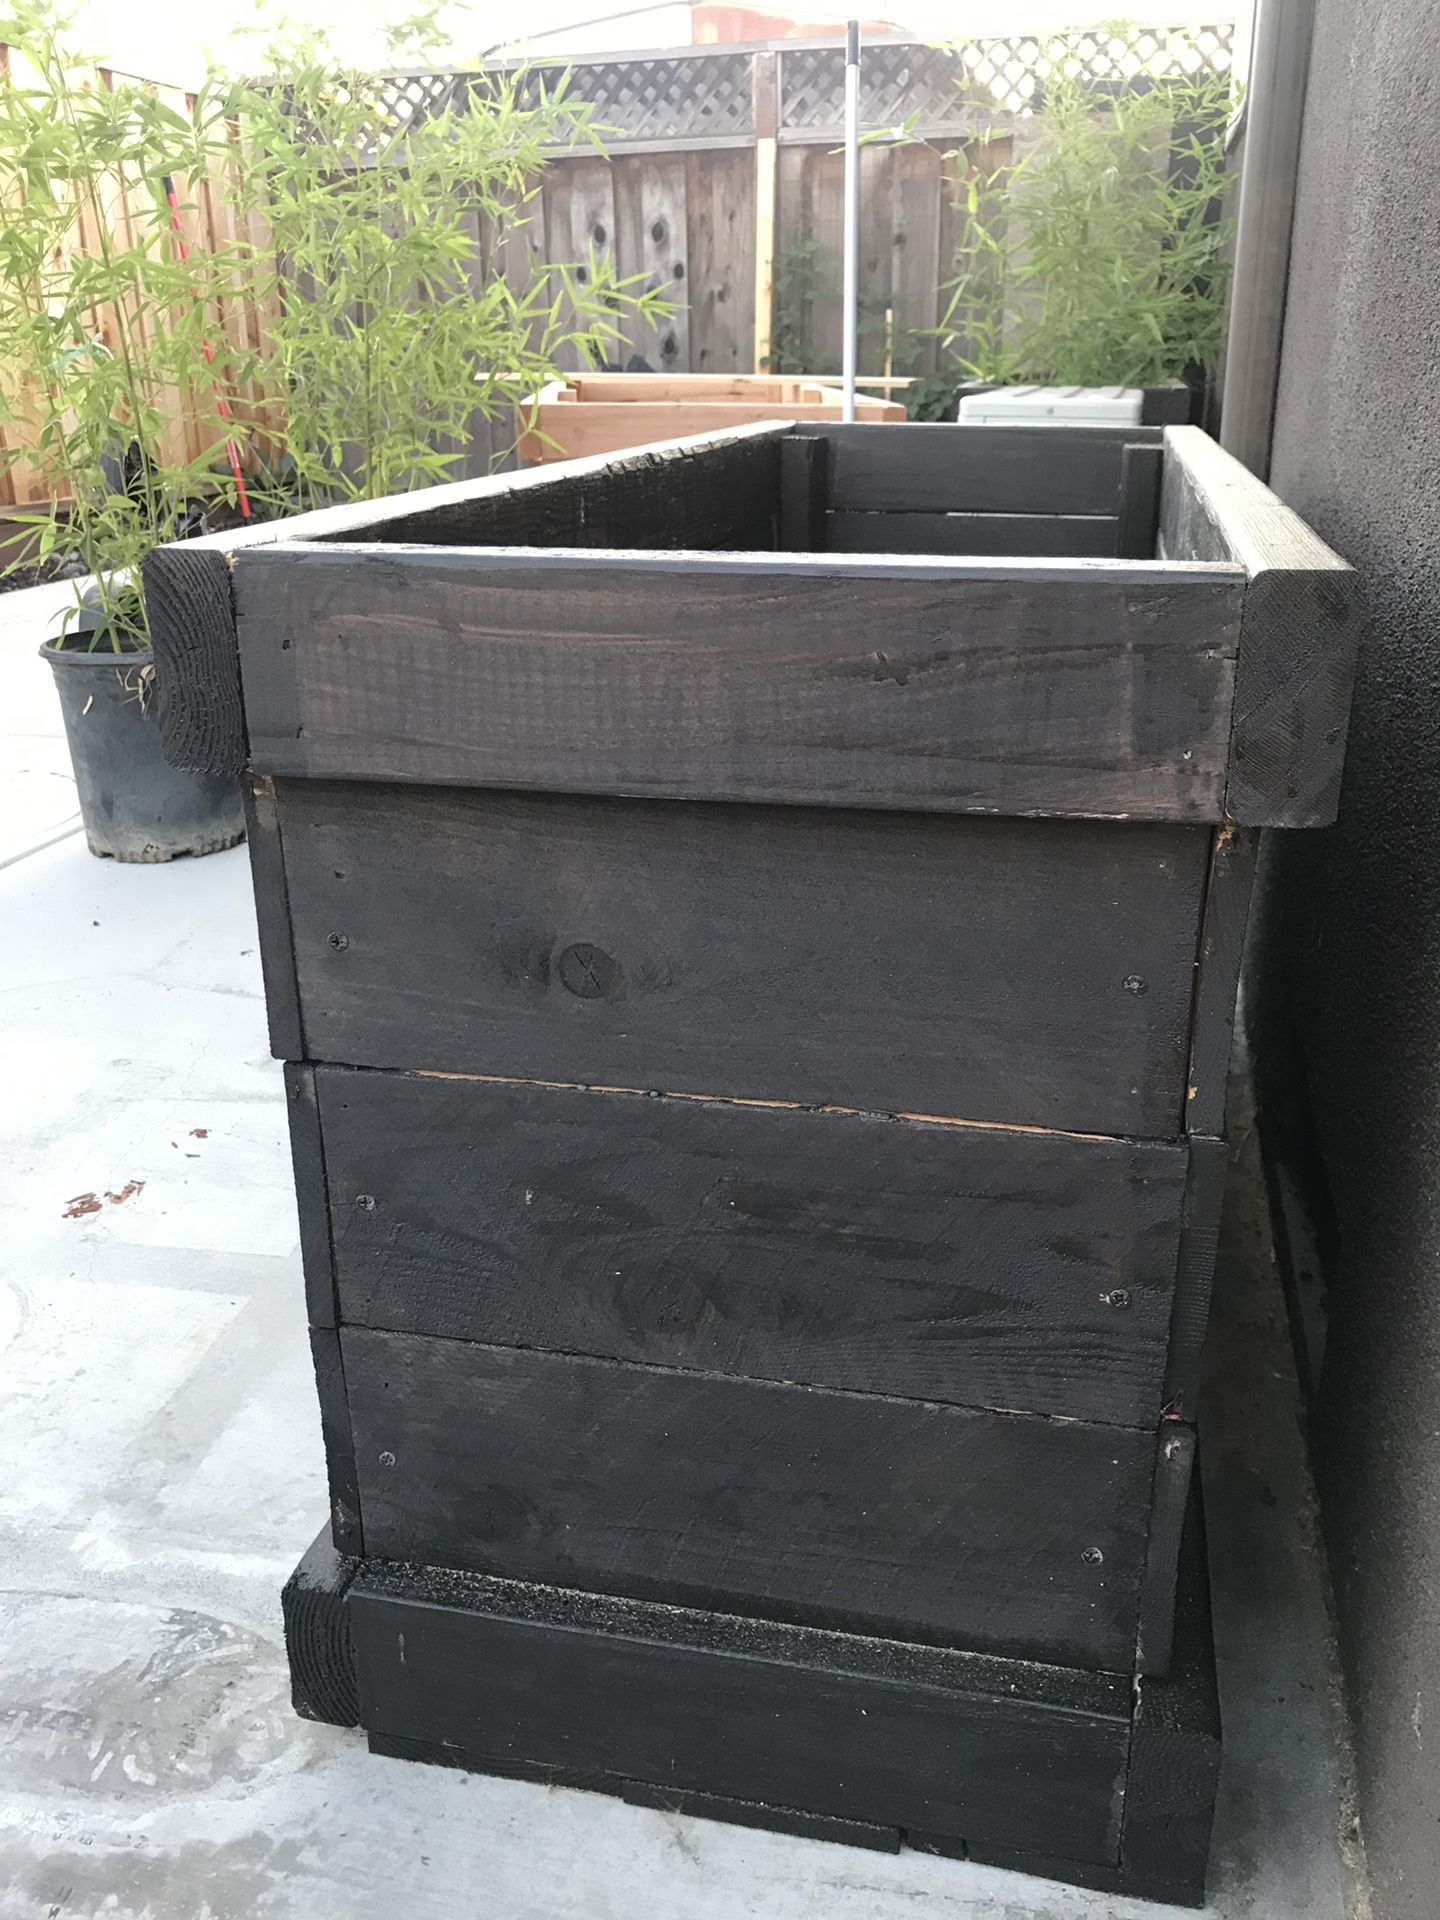 Planter Box Brand New Large. Water protection coated.